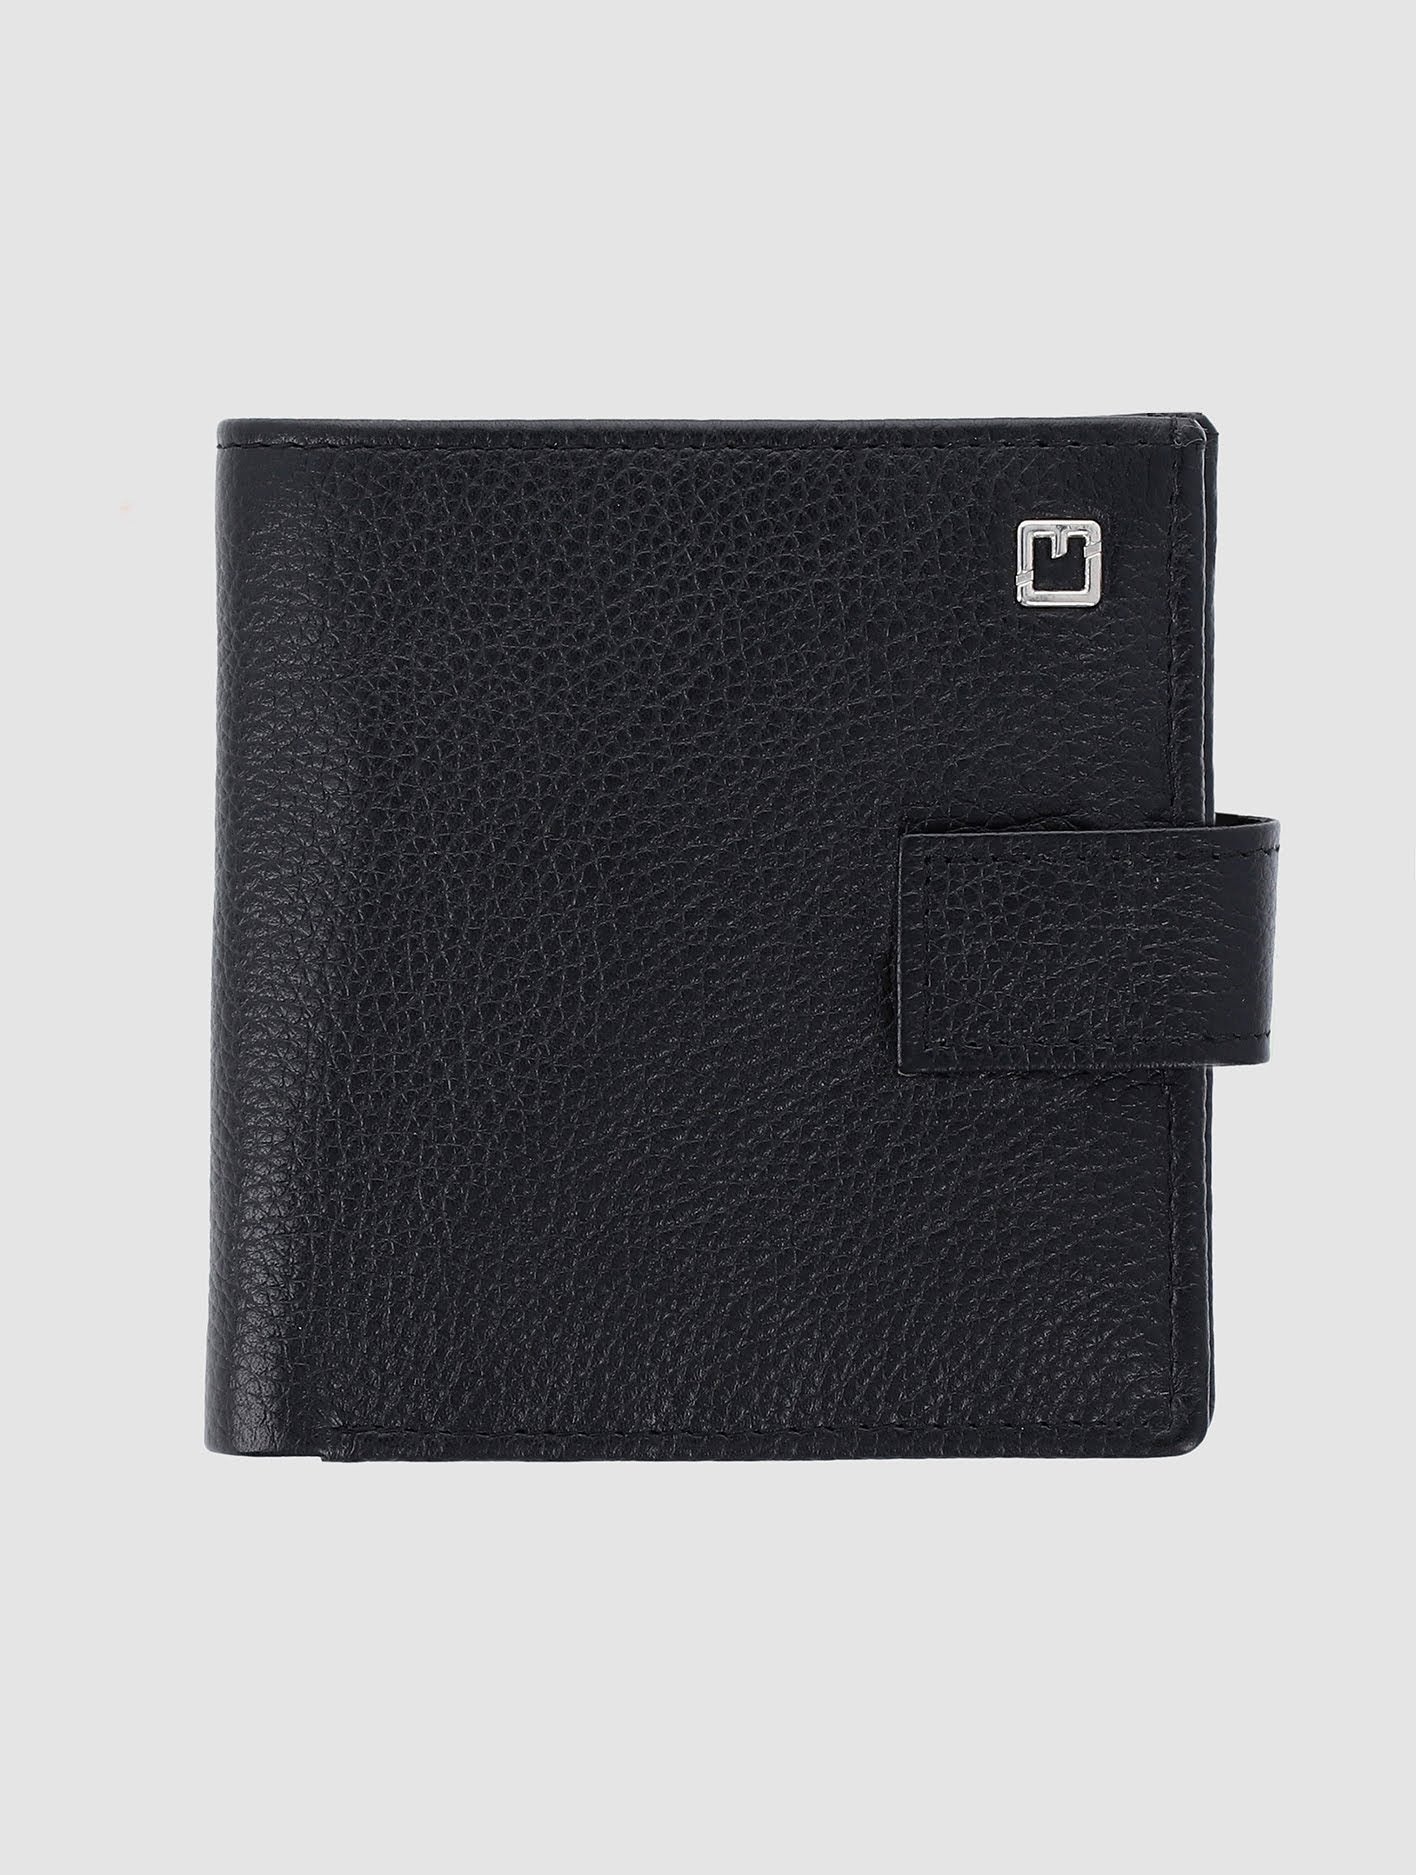 Black Leather Bi-fold Coin Pouch Wallet